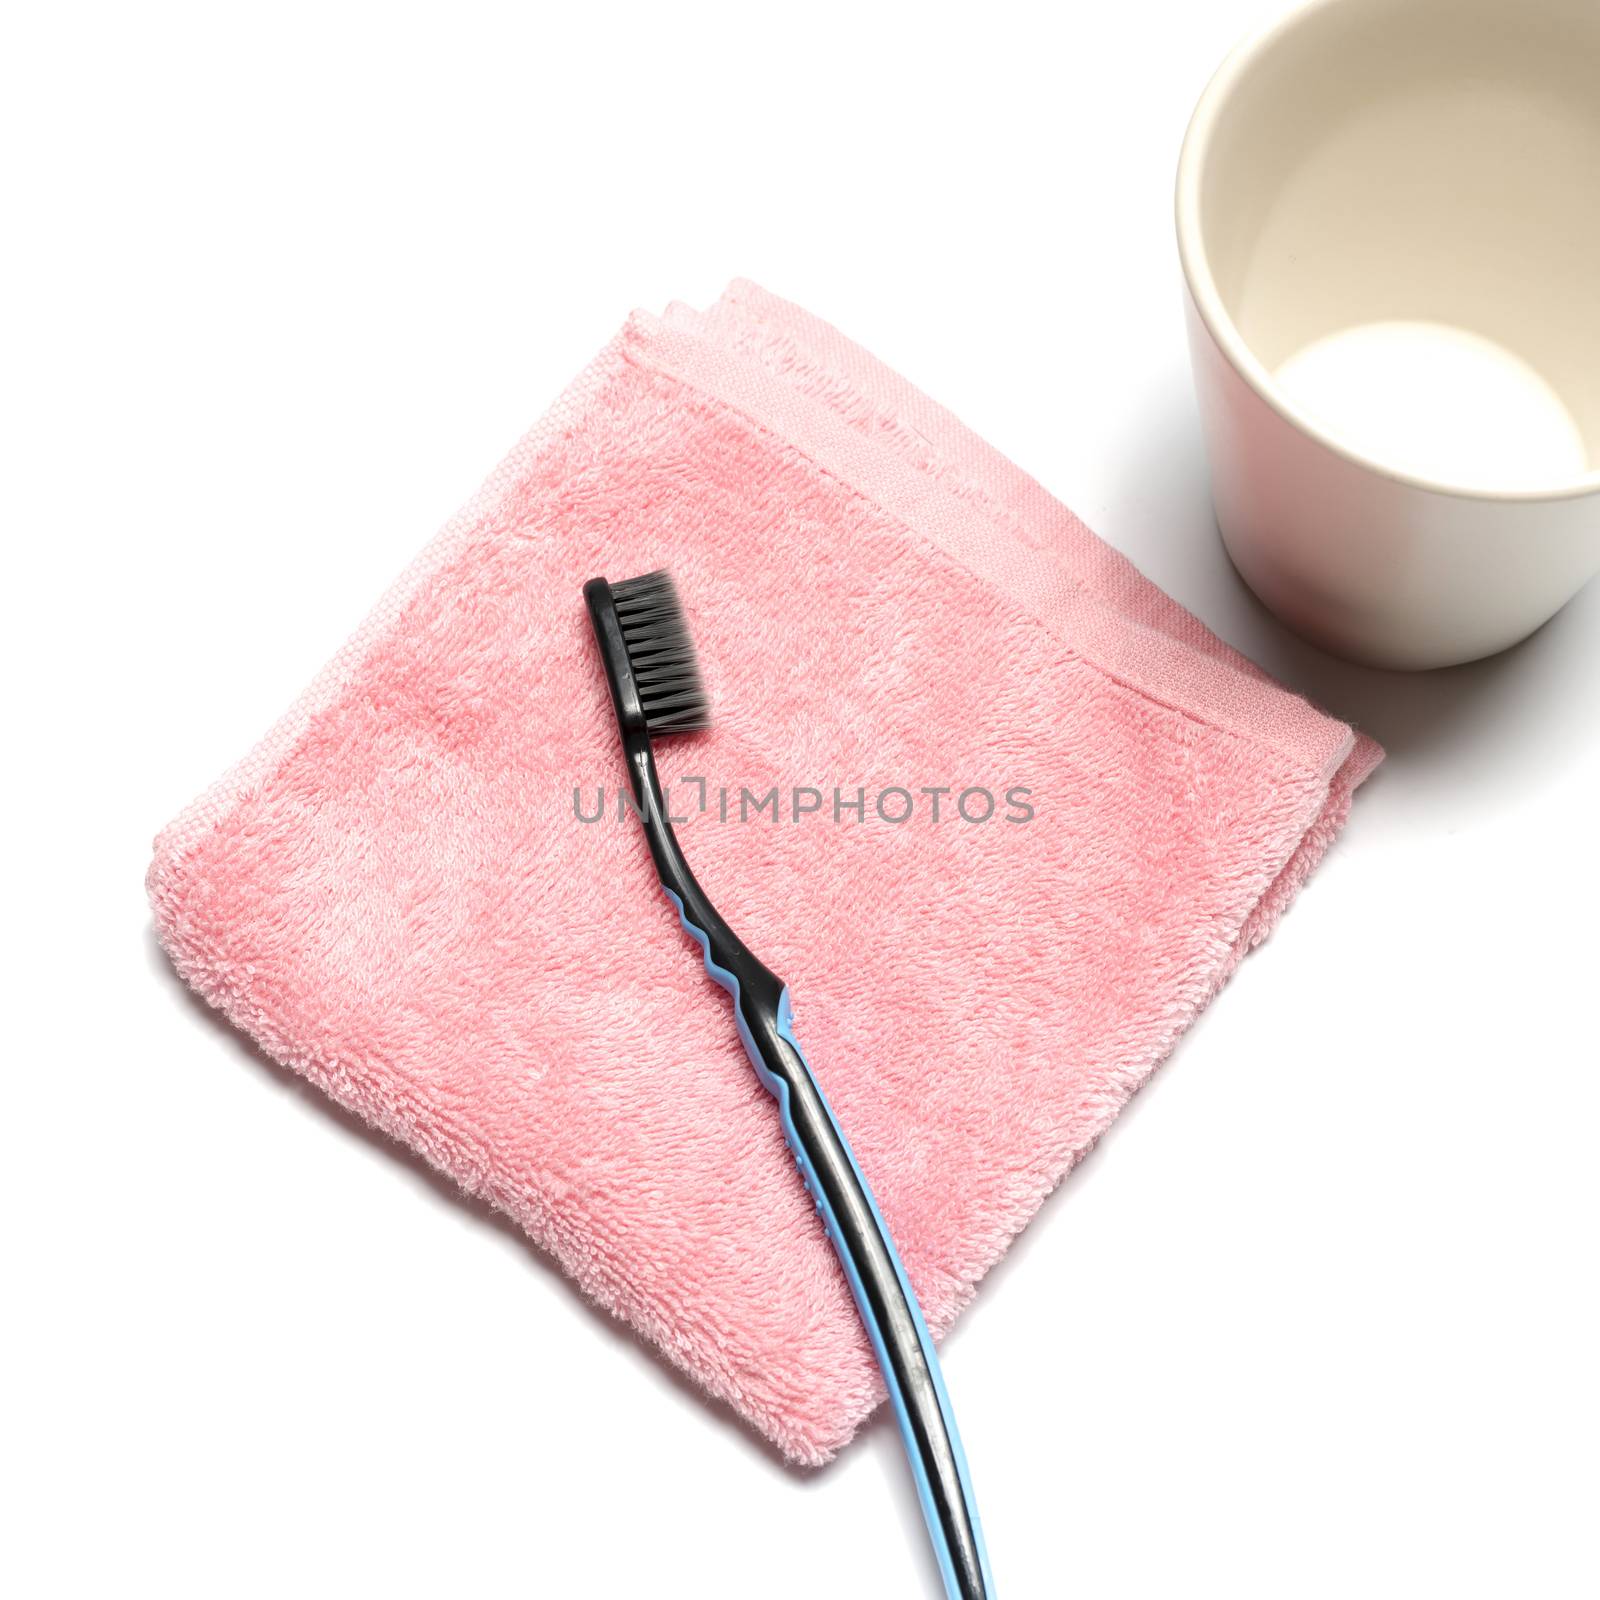 tooth brush and towel with mug isolated on white background